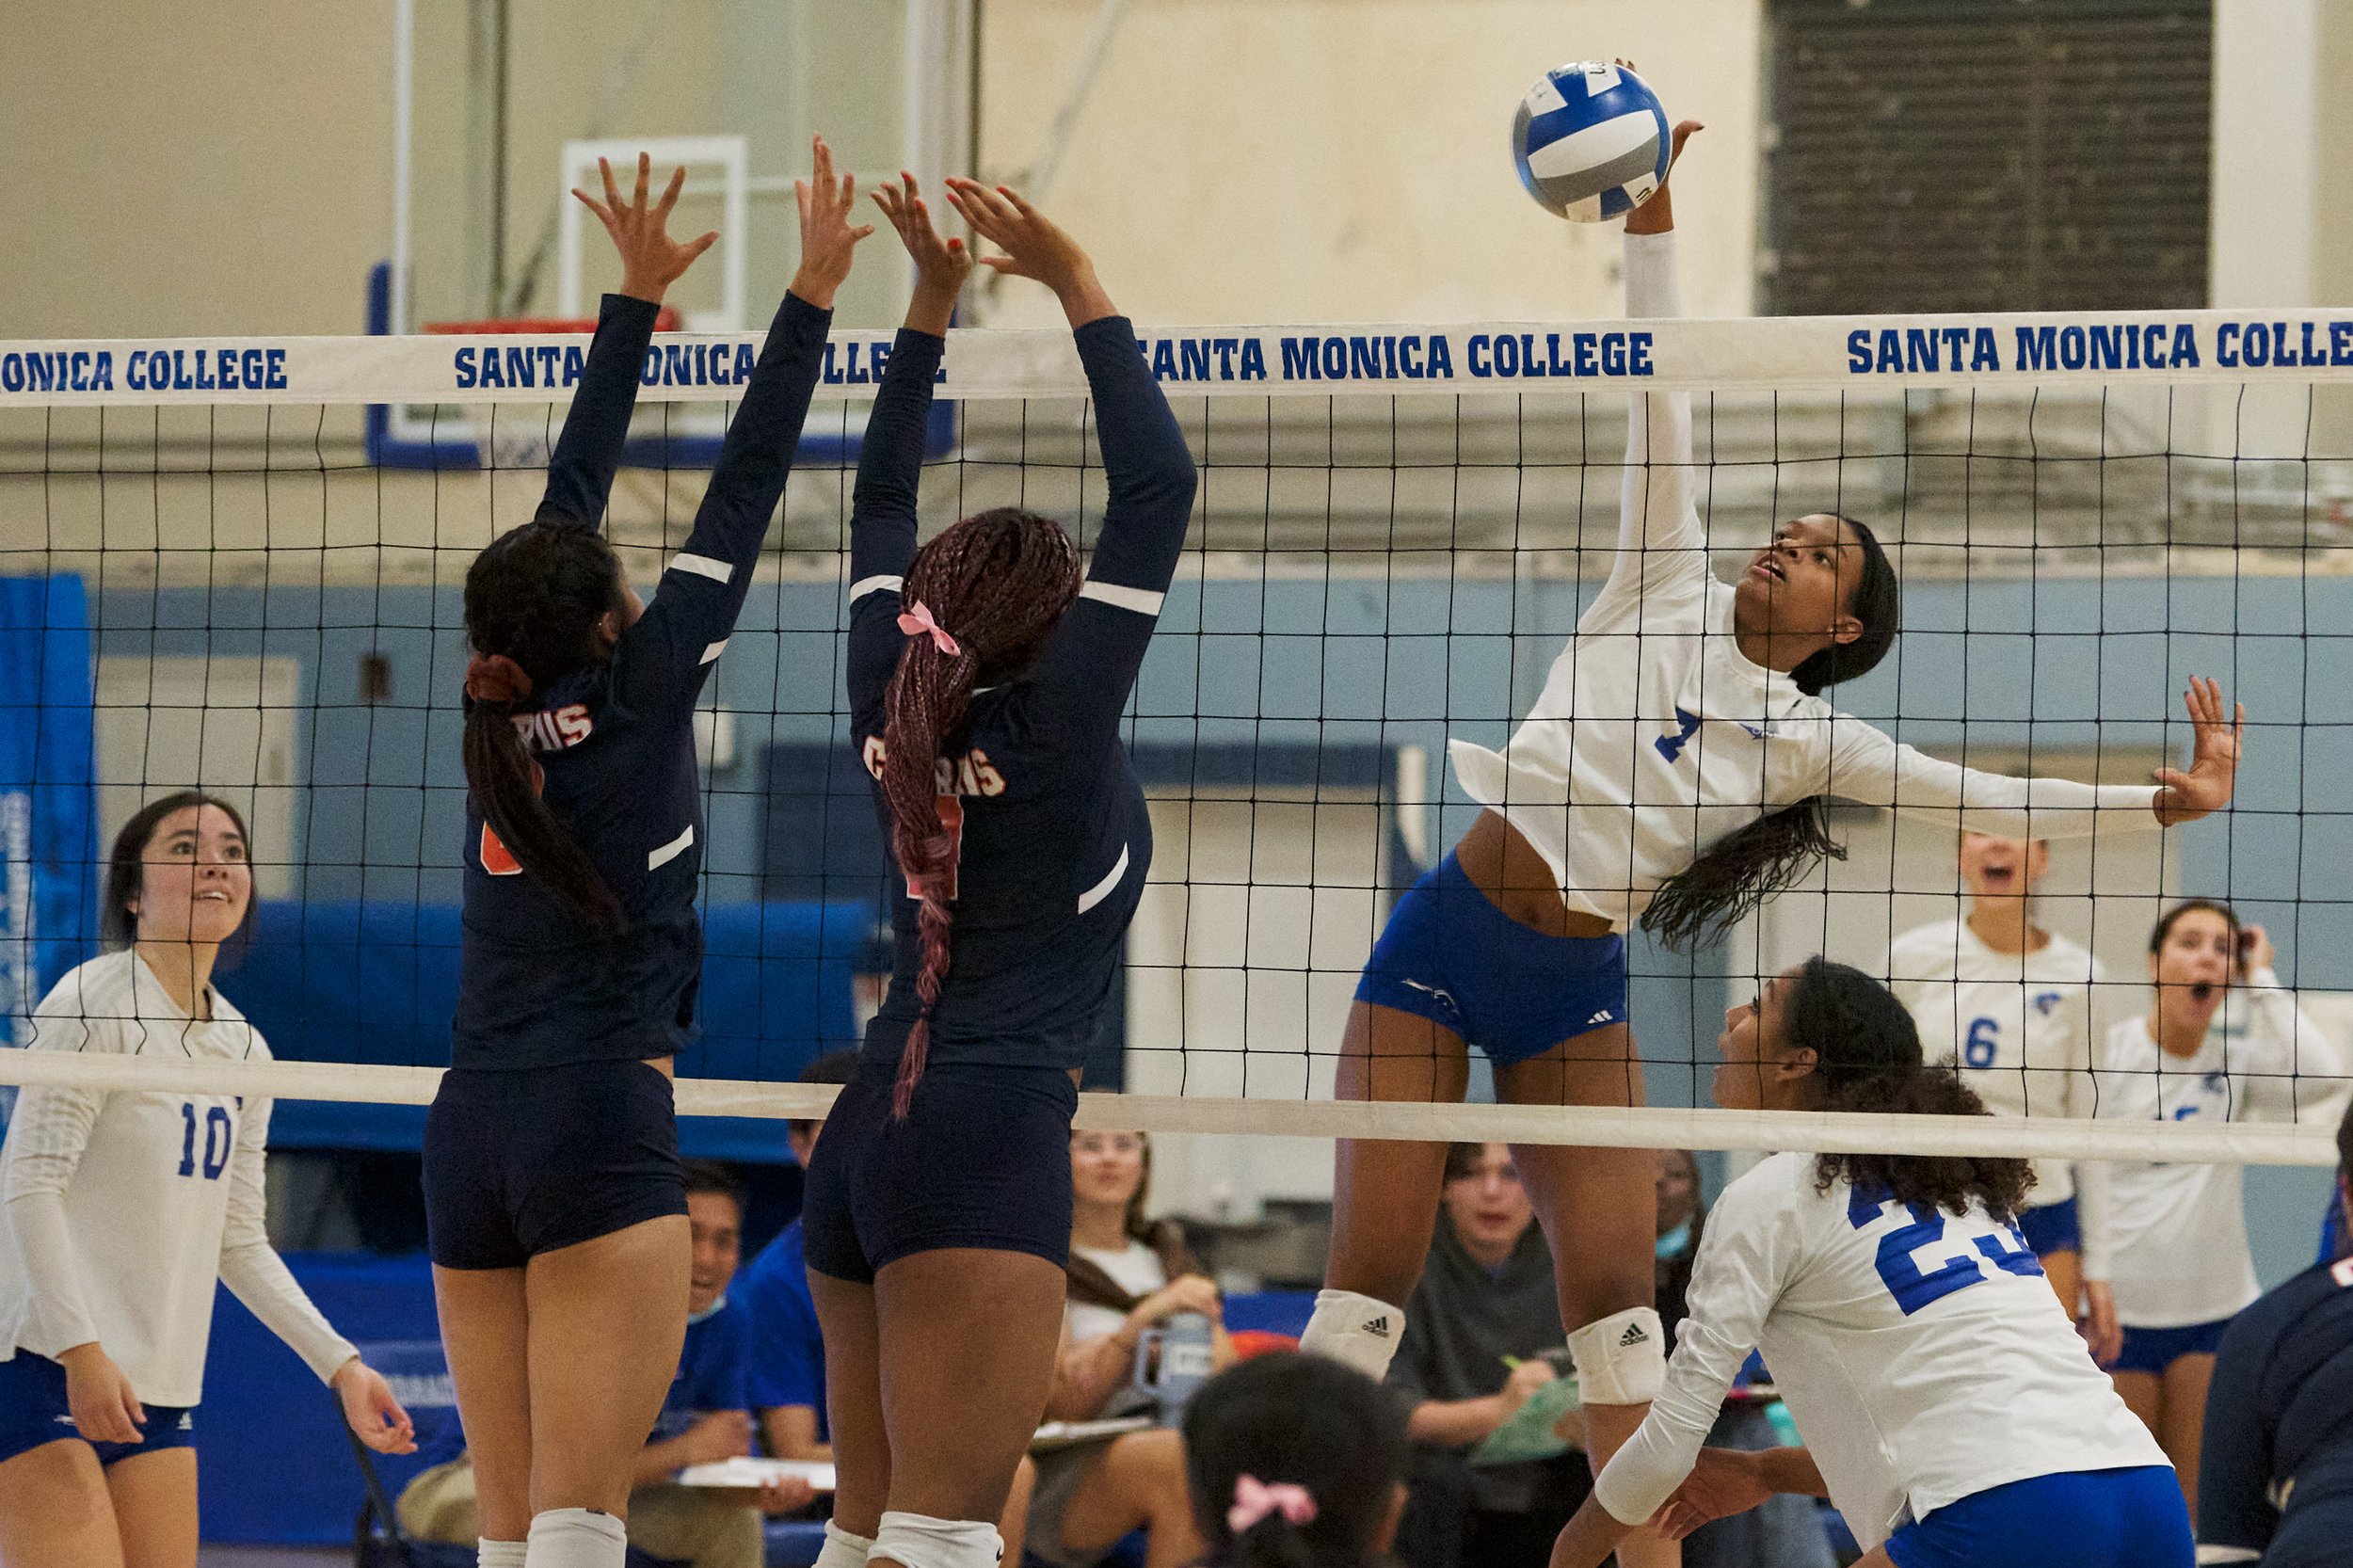  Santa Monica College Corsairs' Zarha Stanton (right) hits the ball past Citrus College Owls' Sabrina Evangelista and Kalin Greene during the women's volleyball match  on Wednesday, Oct. 19, 2022, at Corsair Gym in Santa Monica, Calif. The Corsairs w